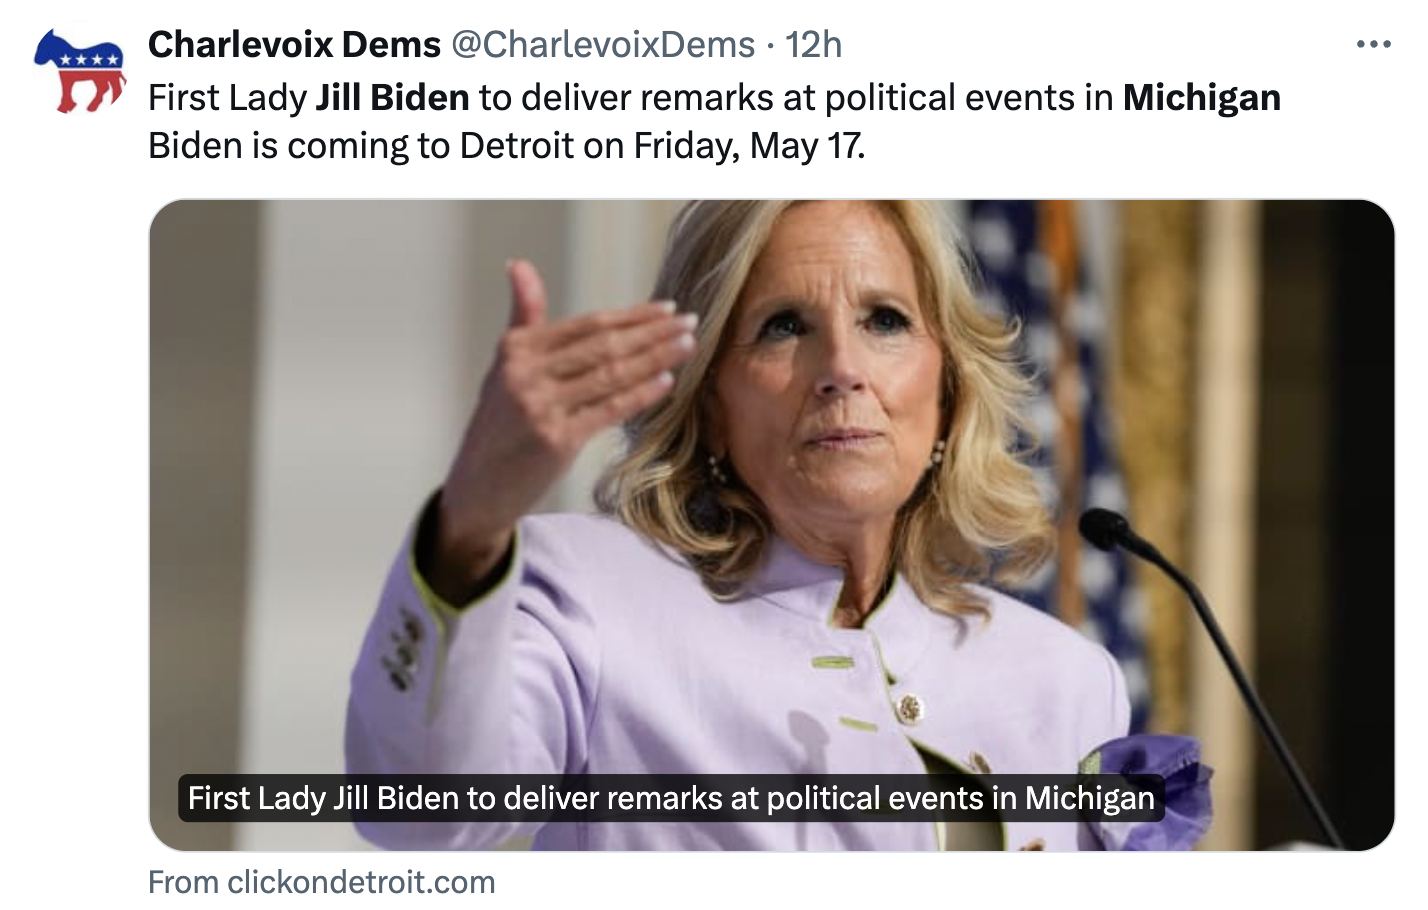 Charlevoix Dems tweet linking to a ClickOnDetroit article about Jill's remarks on her Michigan visit.